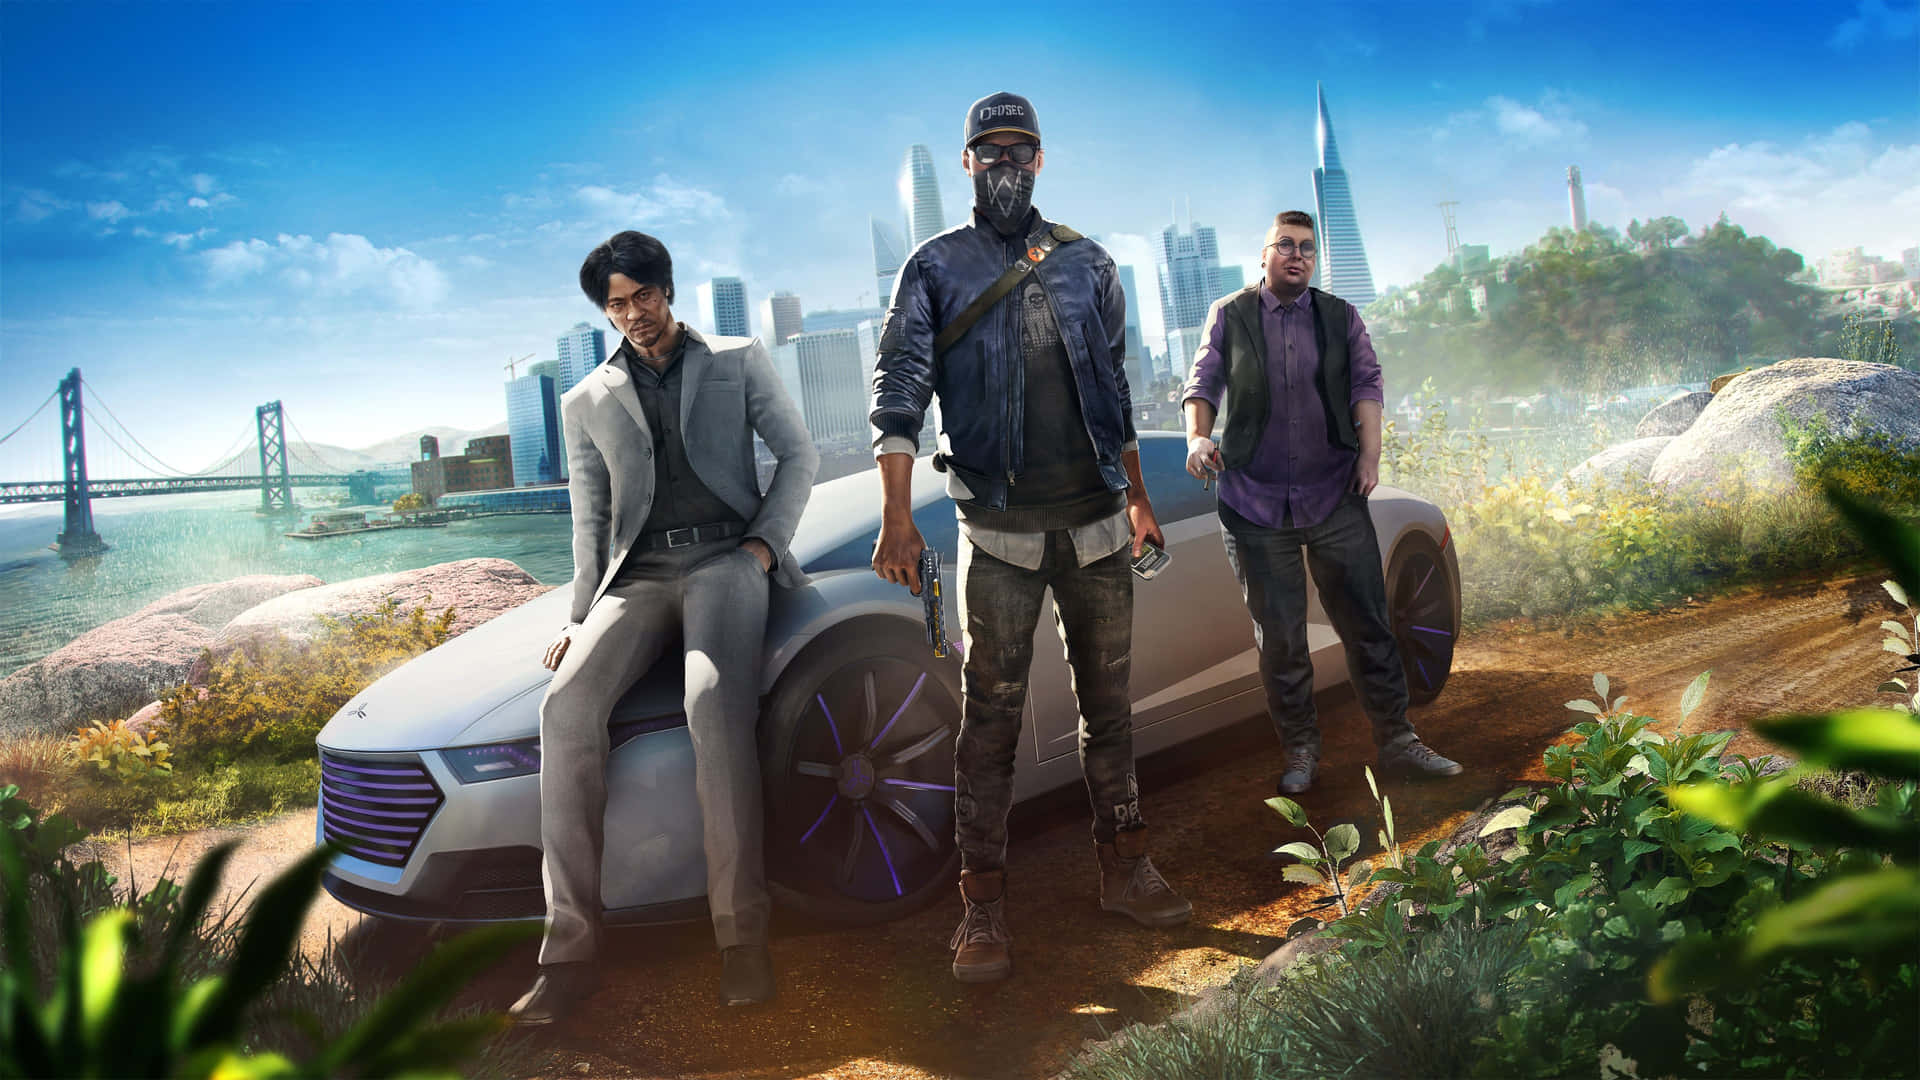 Watchdogs 2 - Pc - Pc - Pc - Pc (same As In English, As It's A Title And The Terms Pc Are The Same In Both Languages) Wallpaper